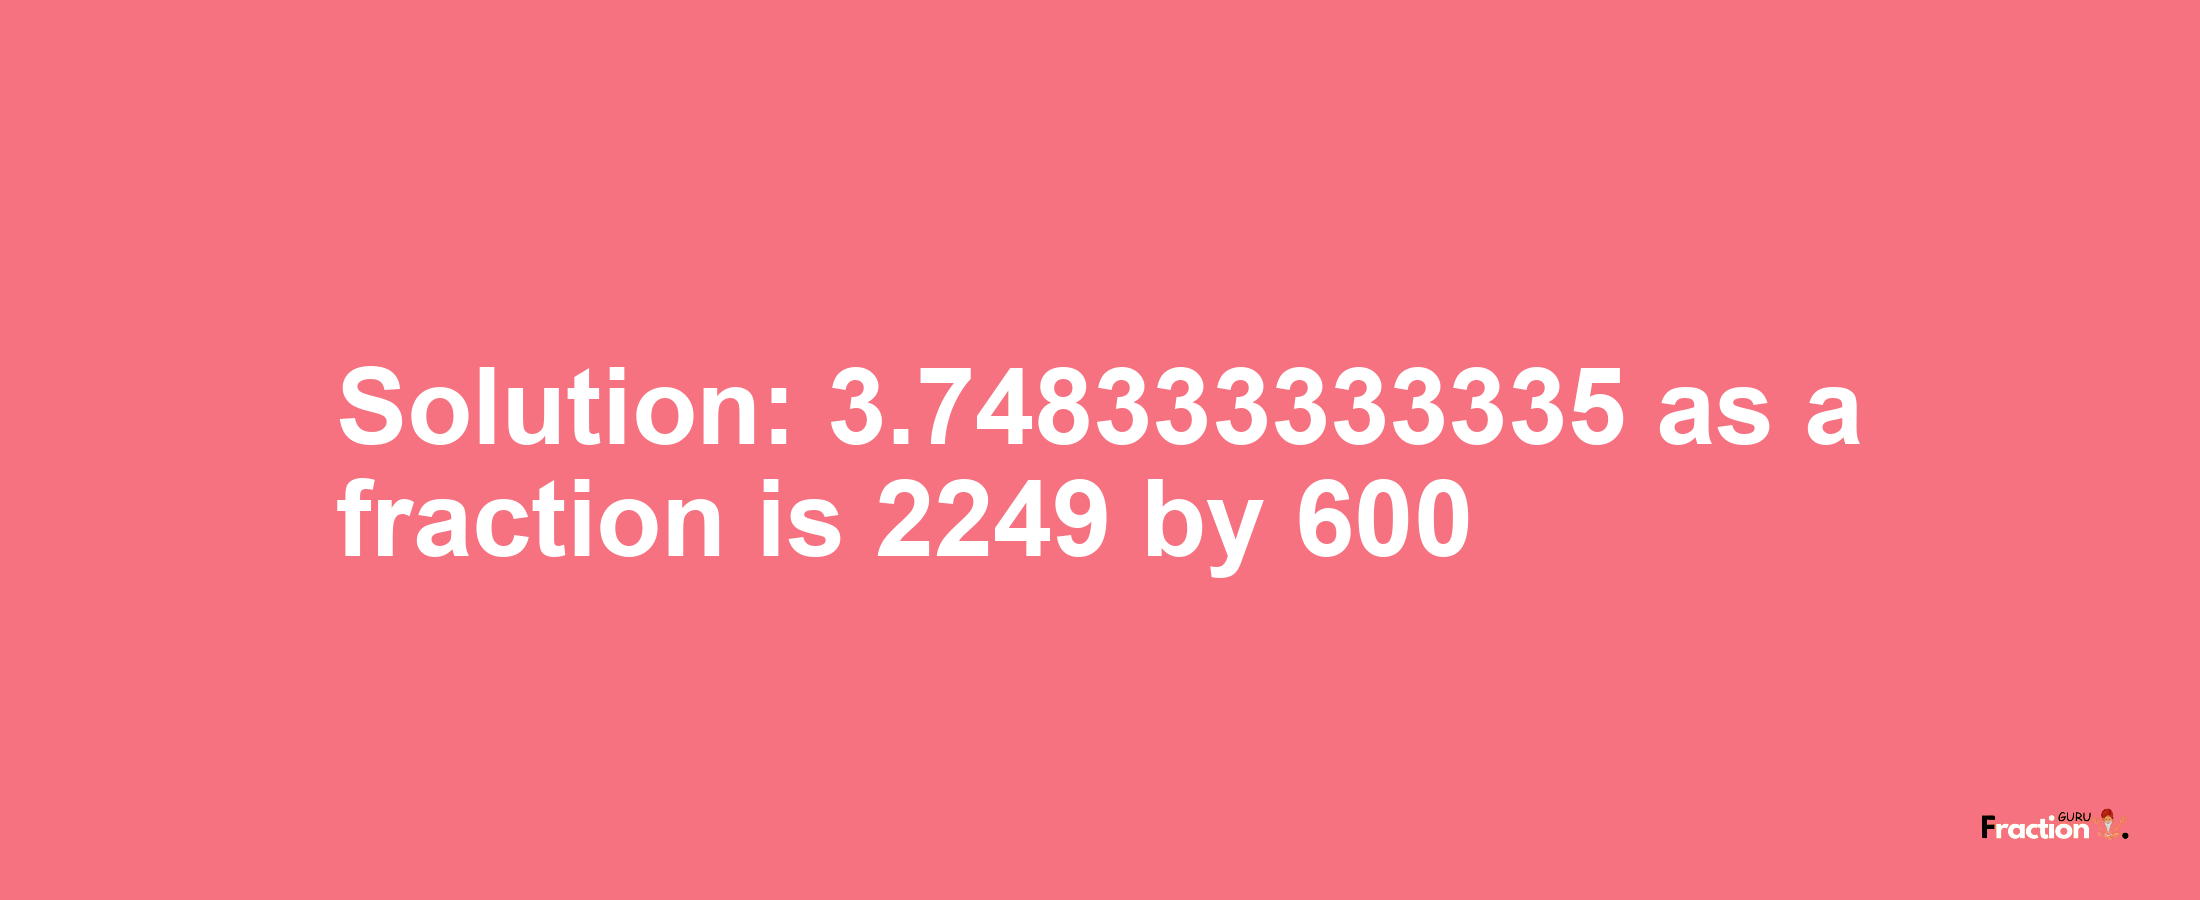 Solution:3.748333333335 as a fraction is 2249/600